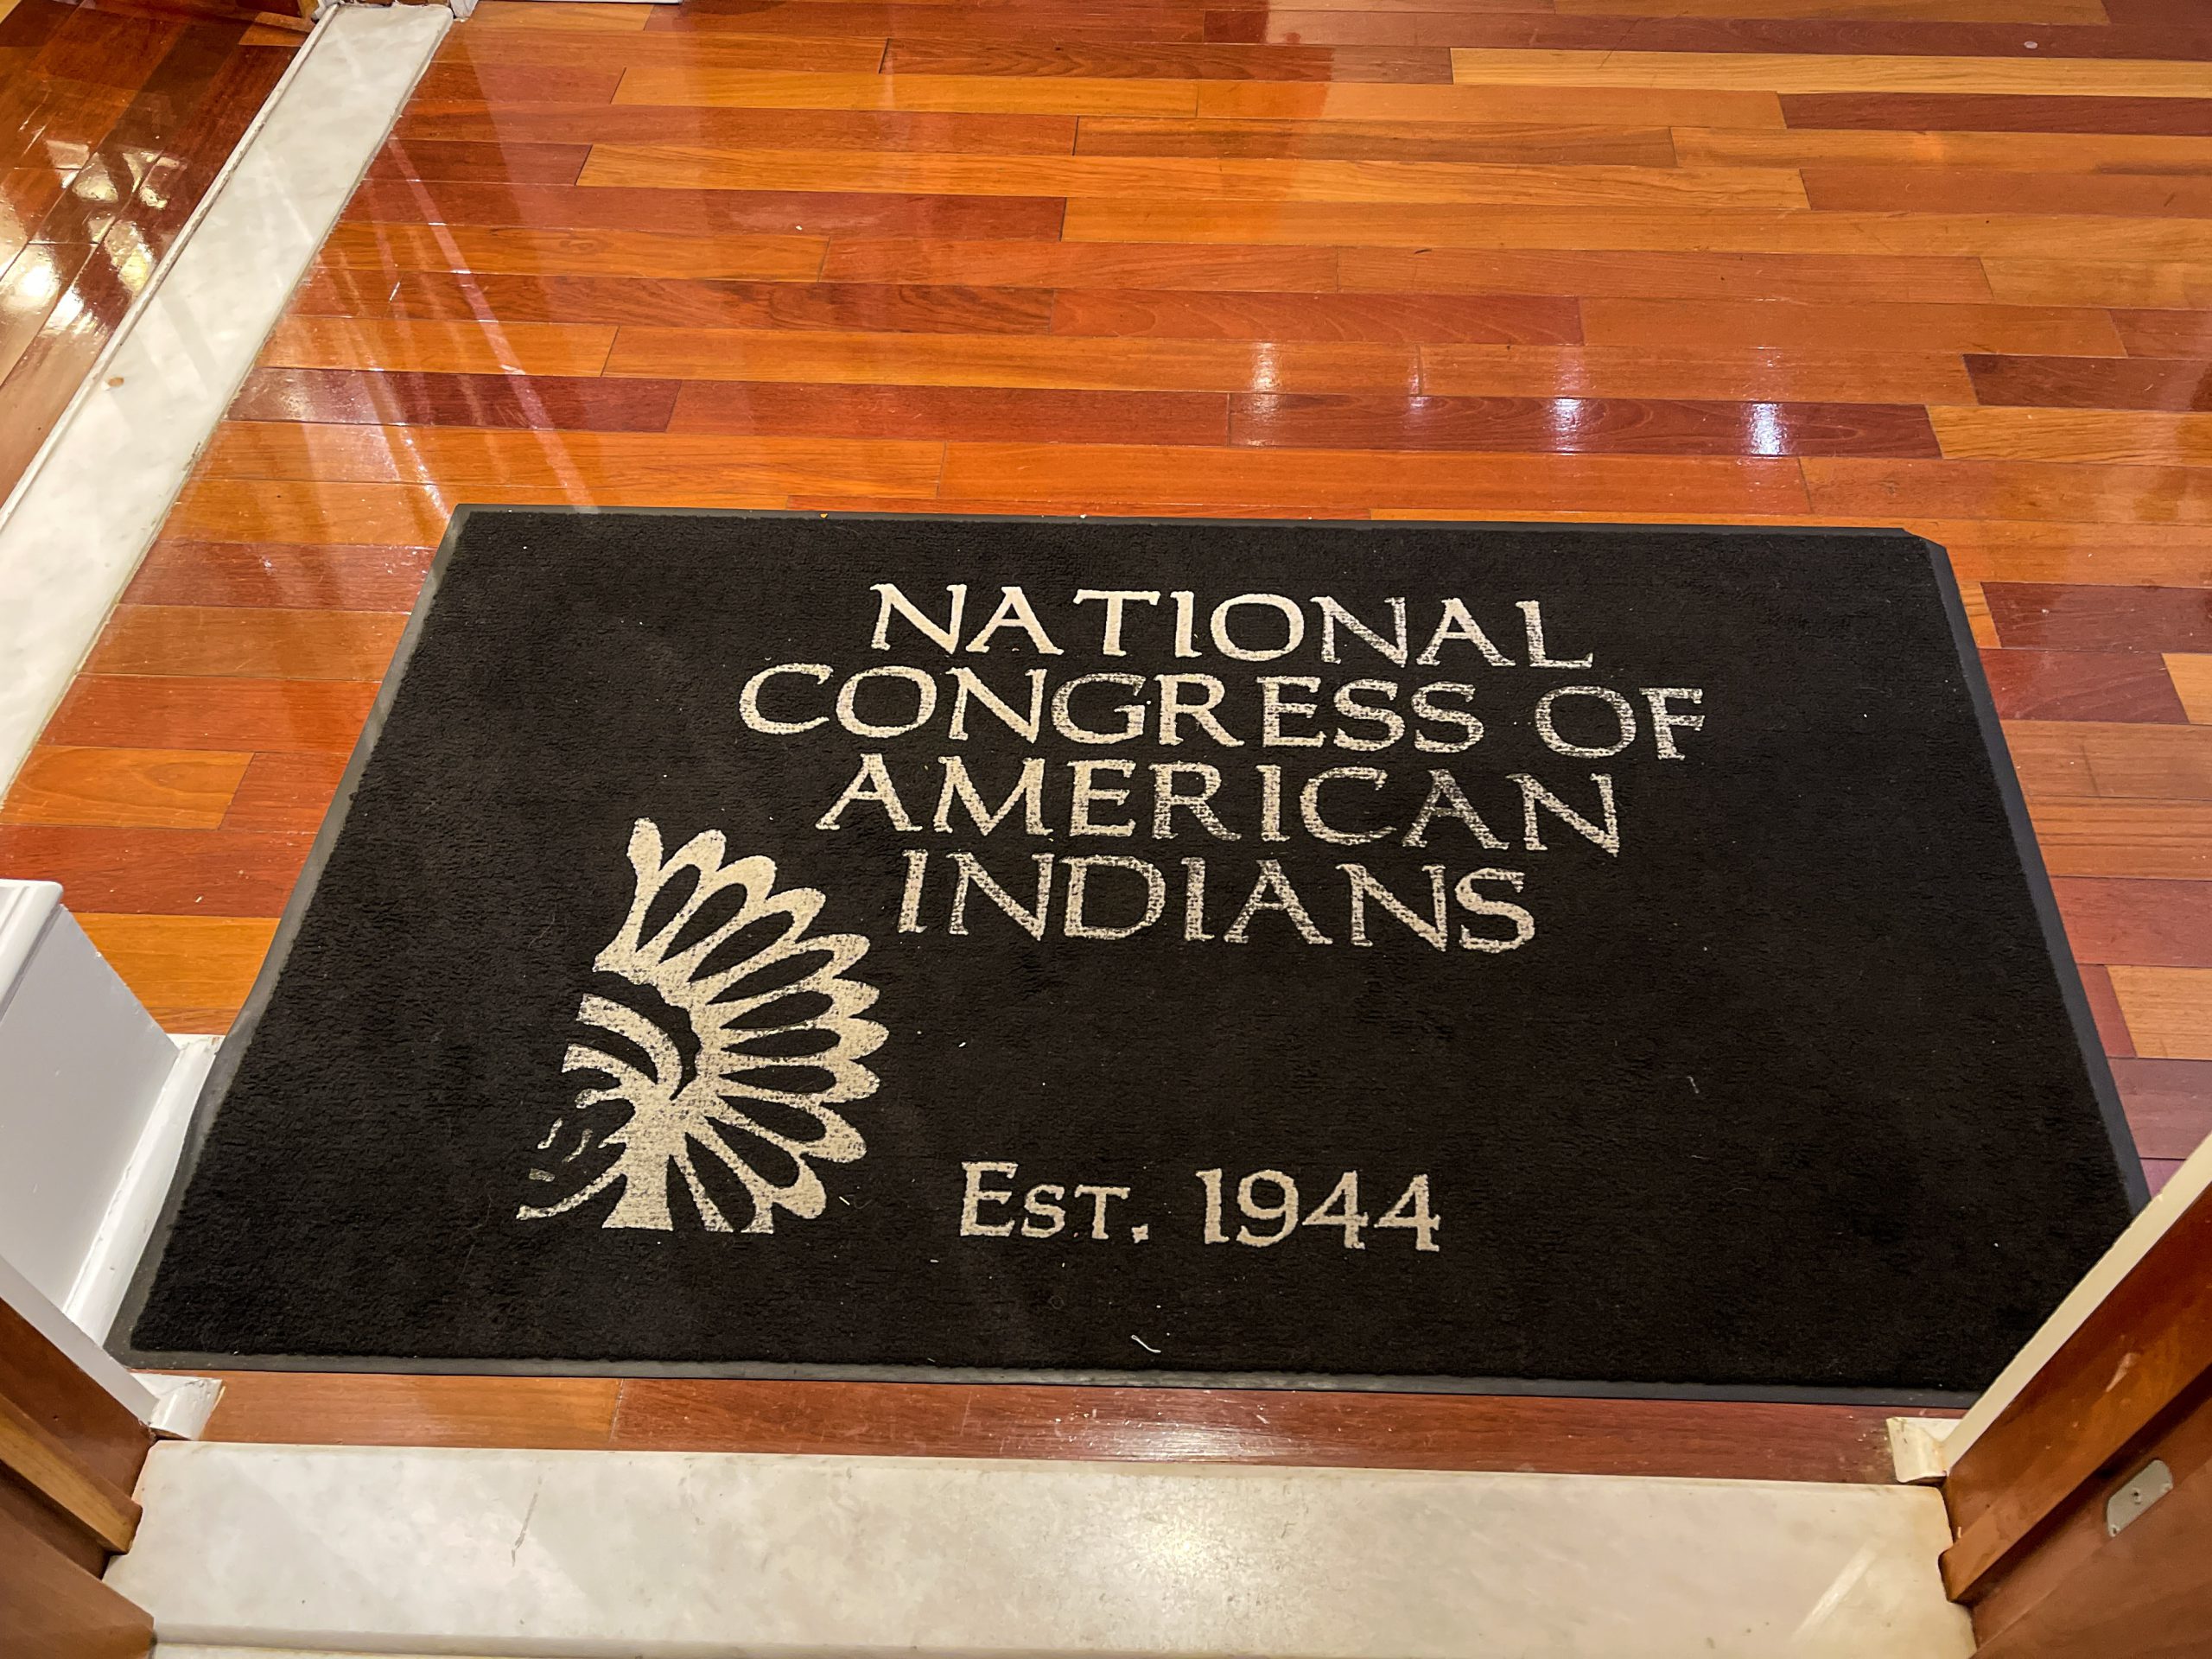 Lawsuit from former executive at National Congress of American Indians sent back to D.C. court